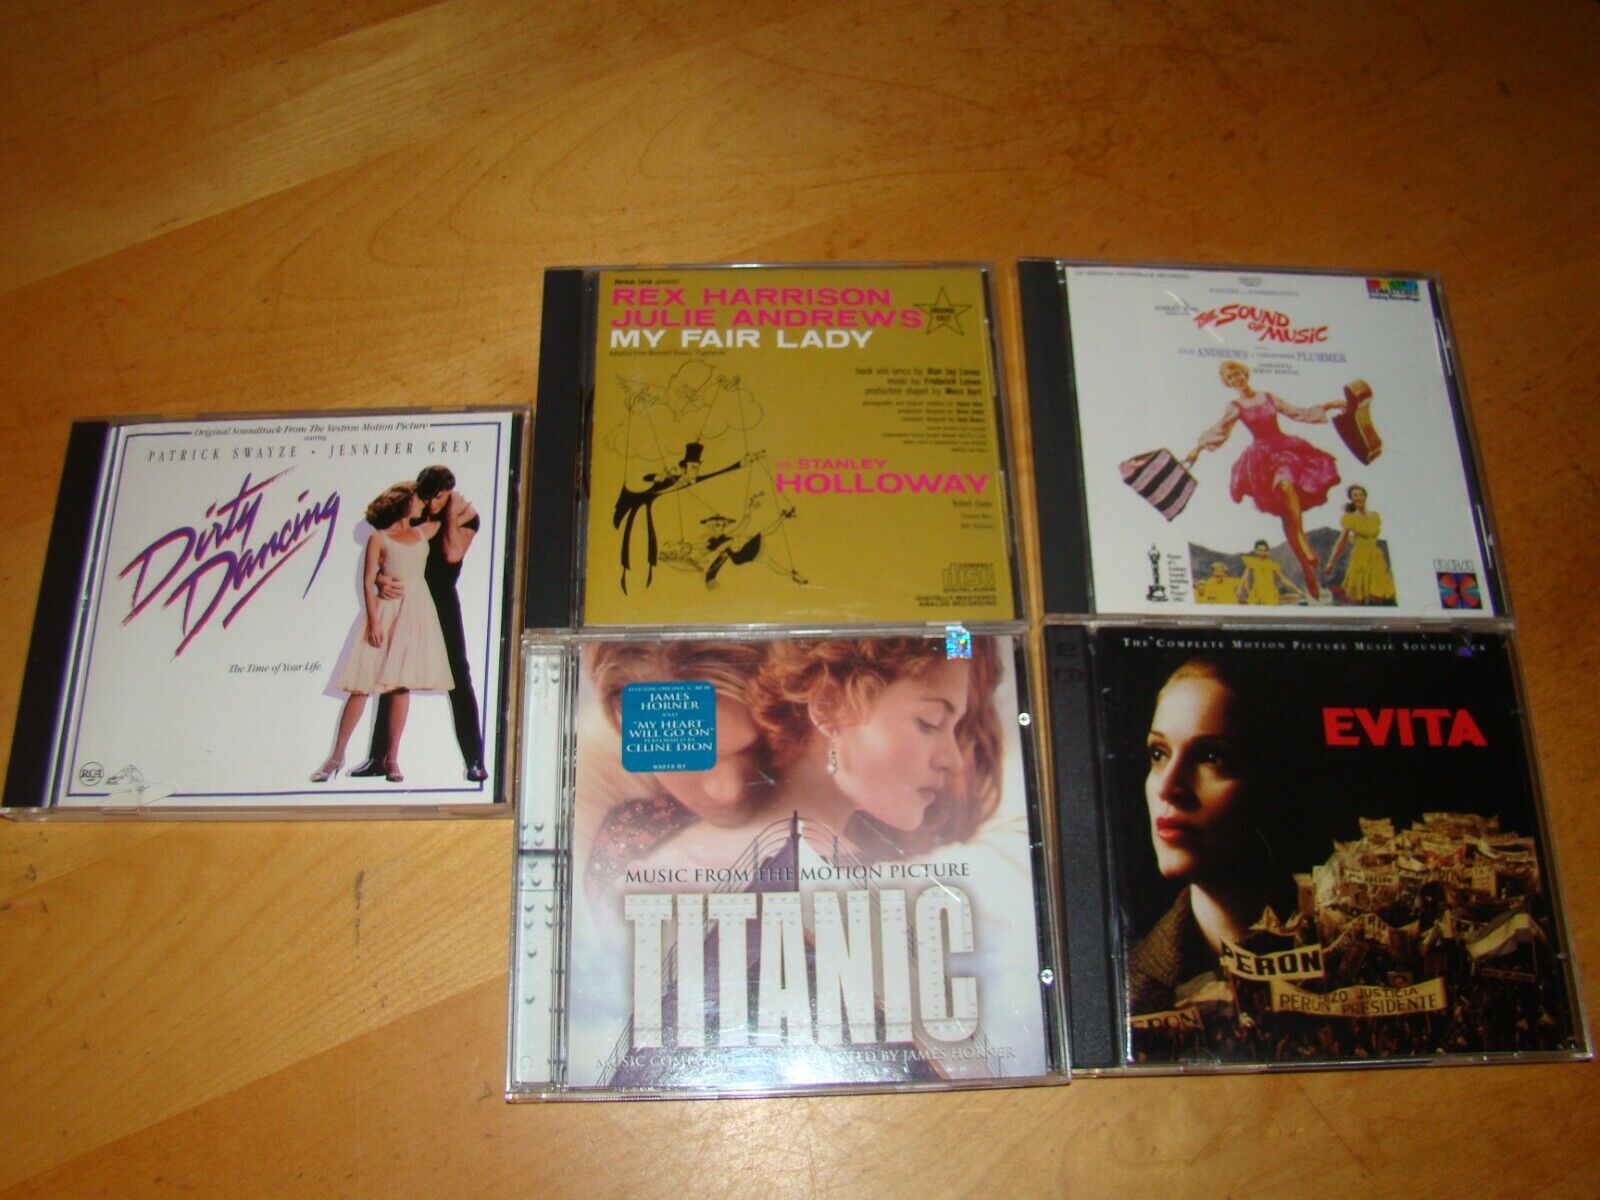 LOT OF 5 CDS MOTION PICTURES EVITA SOUND MUSIC TITANIC DIRTY DANCING FAIR LADY 